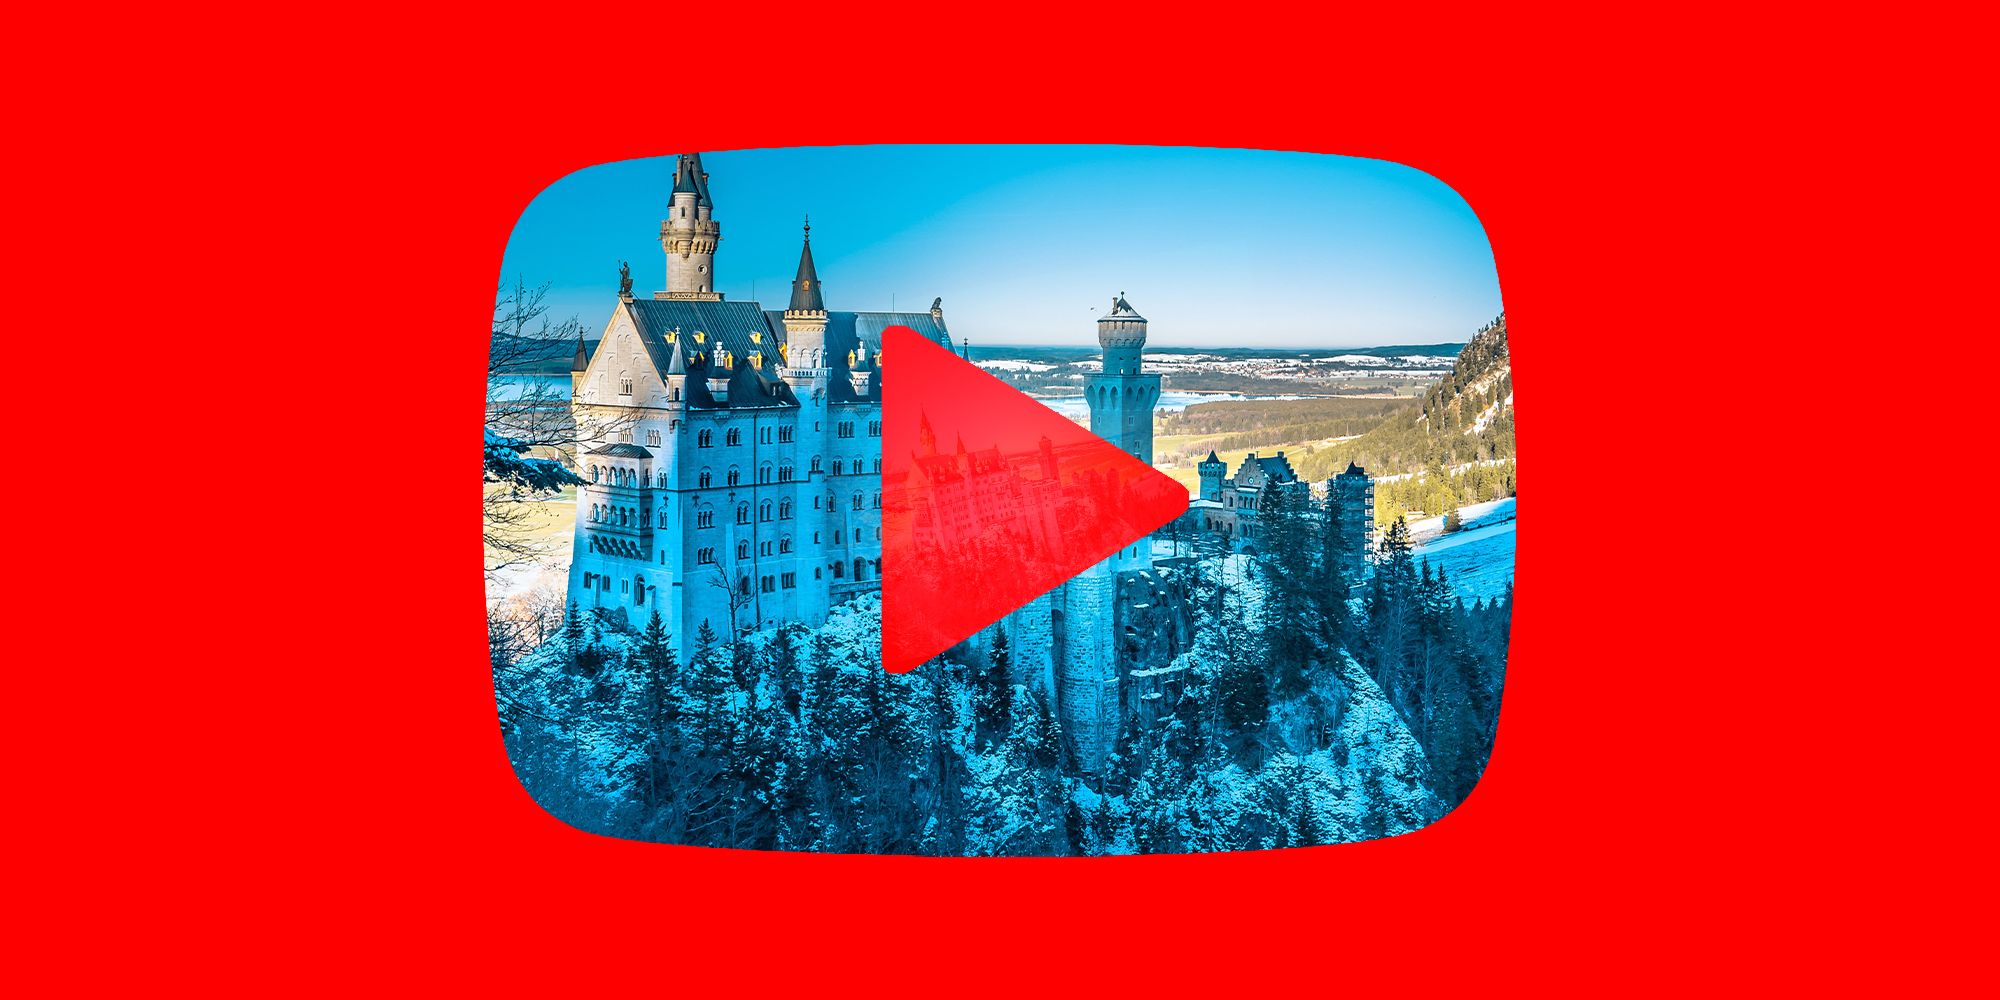 YouTube logo with an iconic German castle